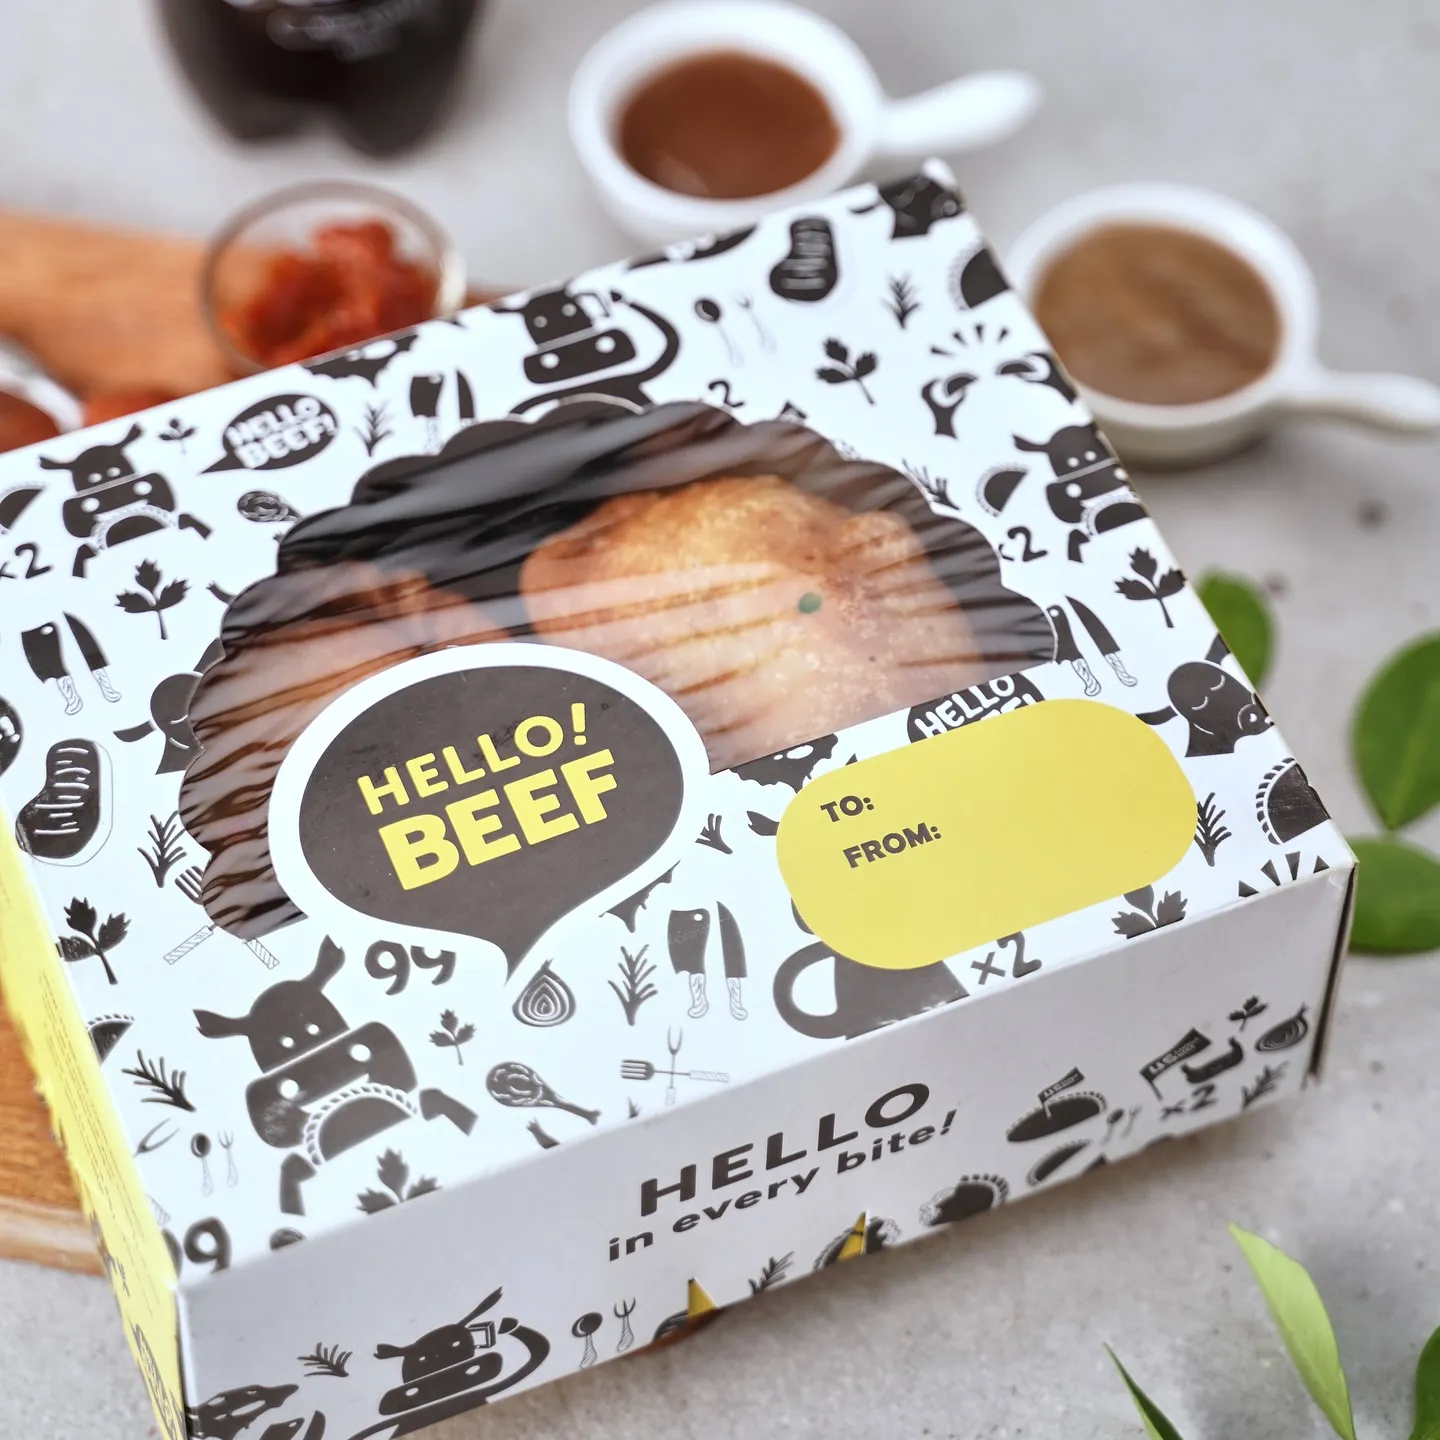 Hello Beef 필리핀 배달 Food delivery ph - LAHAT FOOD